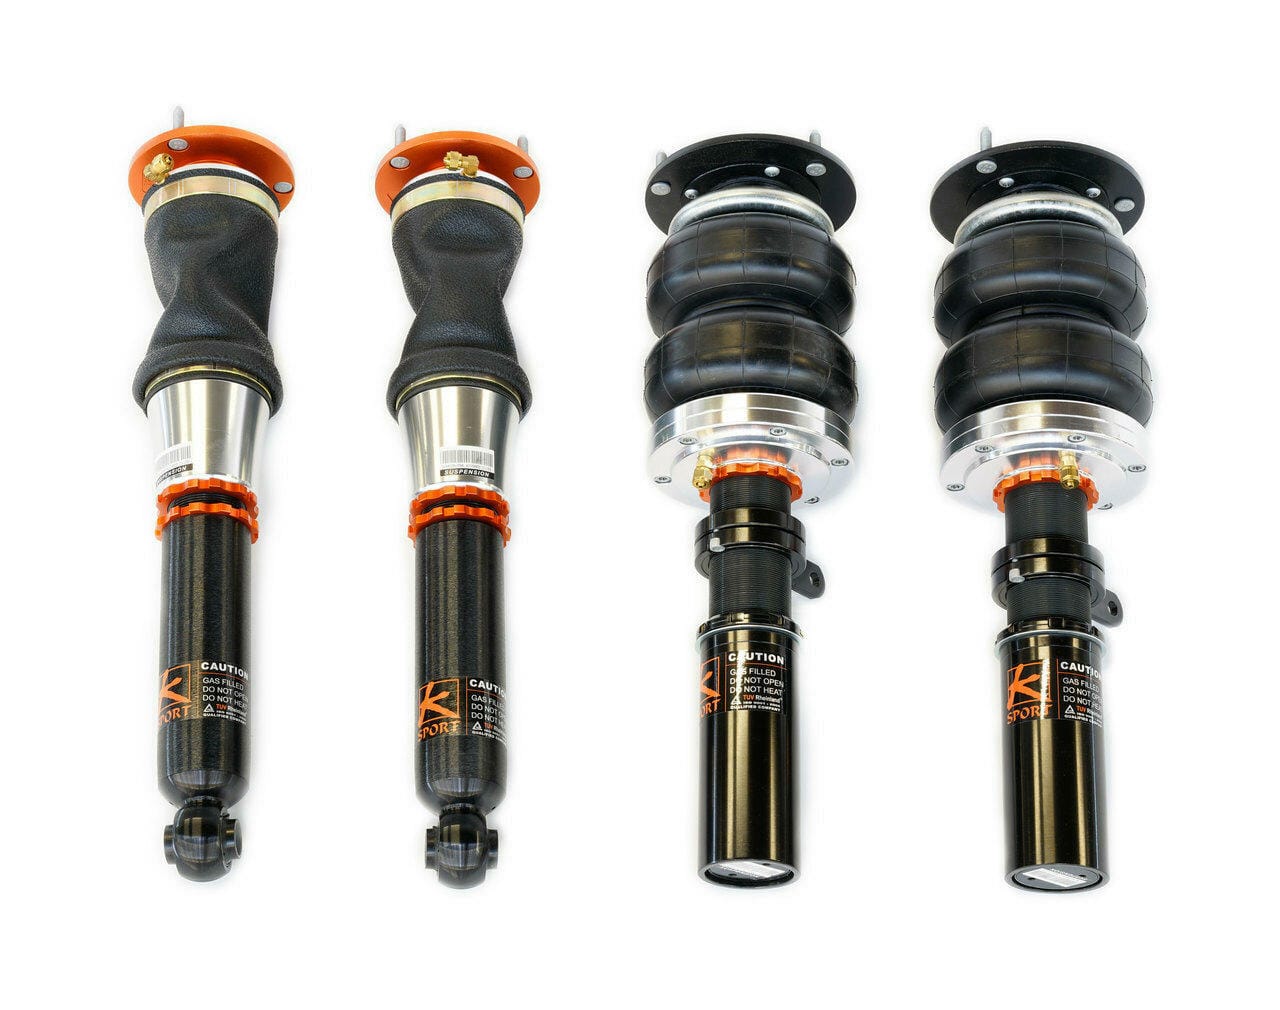 Ksport Airtech Air Suspension System Struts Only - 1982-1988 BMW 5 Series 524td, 528e, 533i, 535i w/ 52mm Front Strut Weld-In E28 CBM180-ASO-01